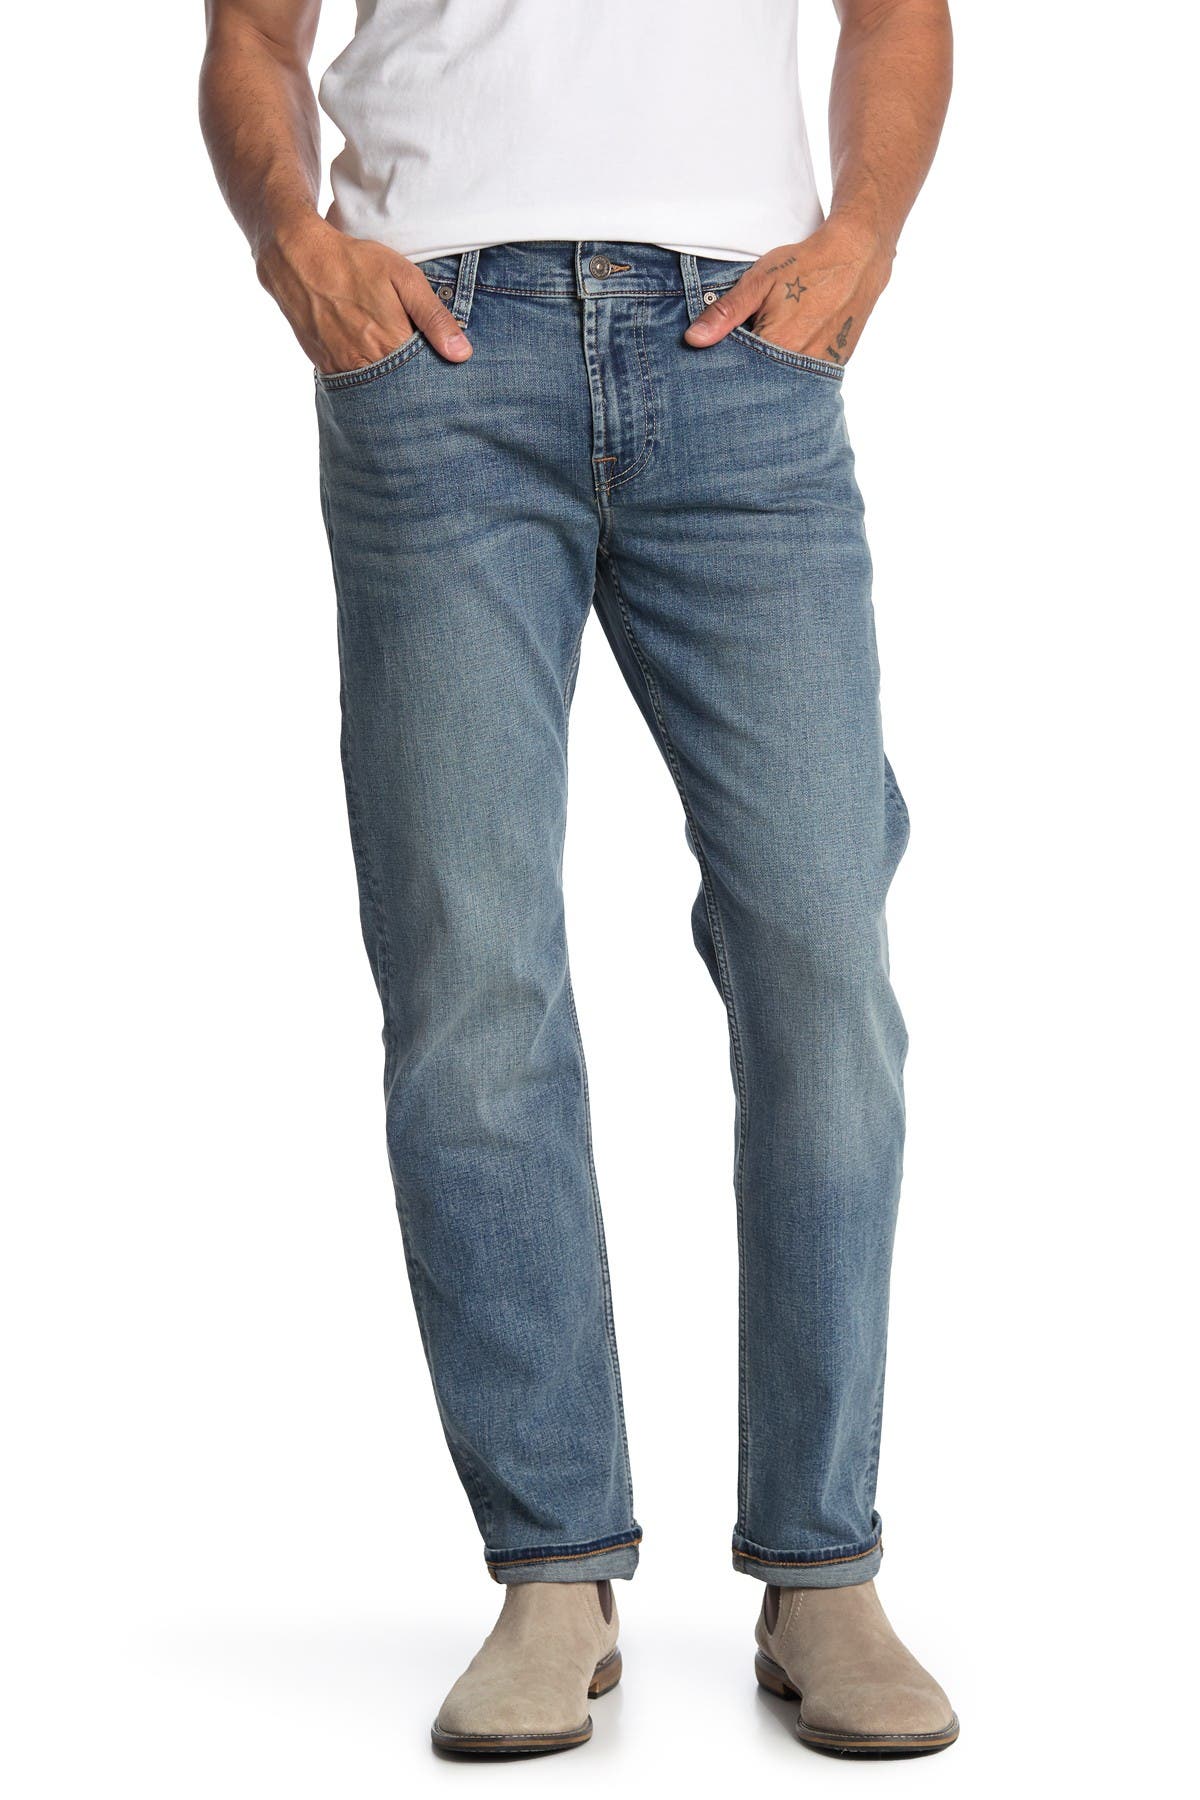 7 for all mankind flip flop jeans